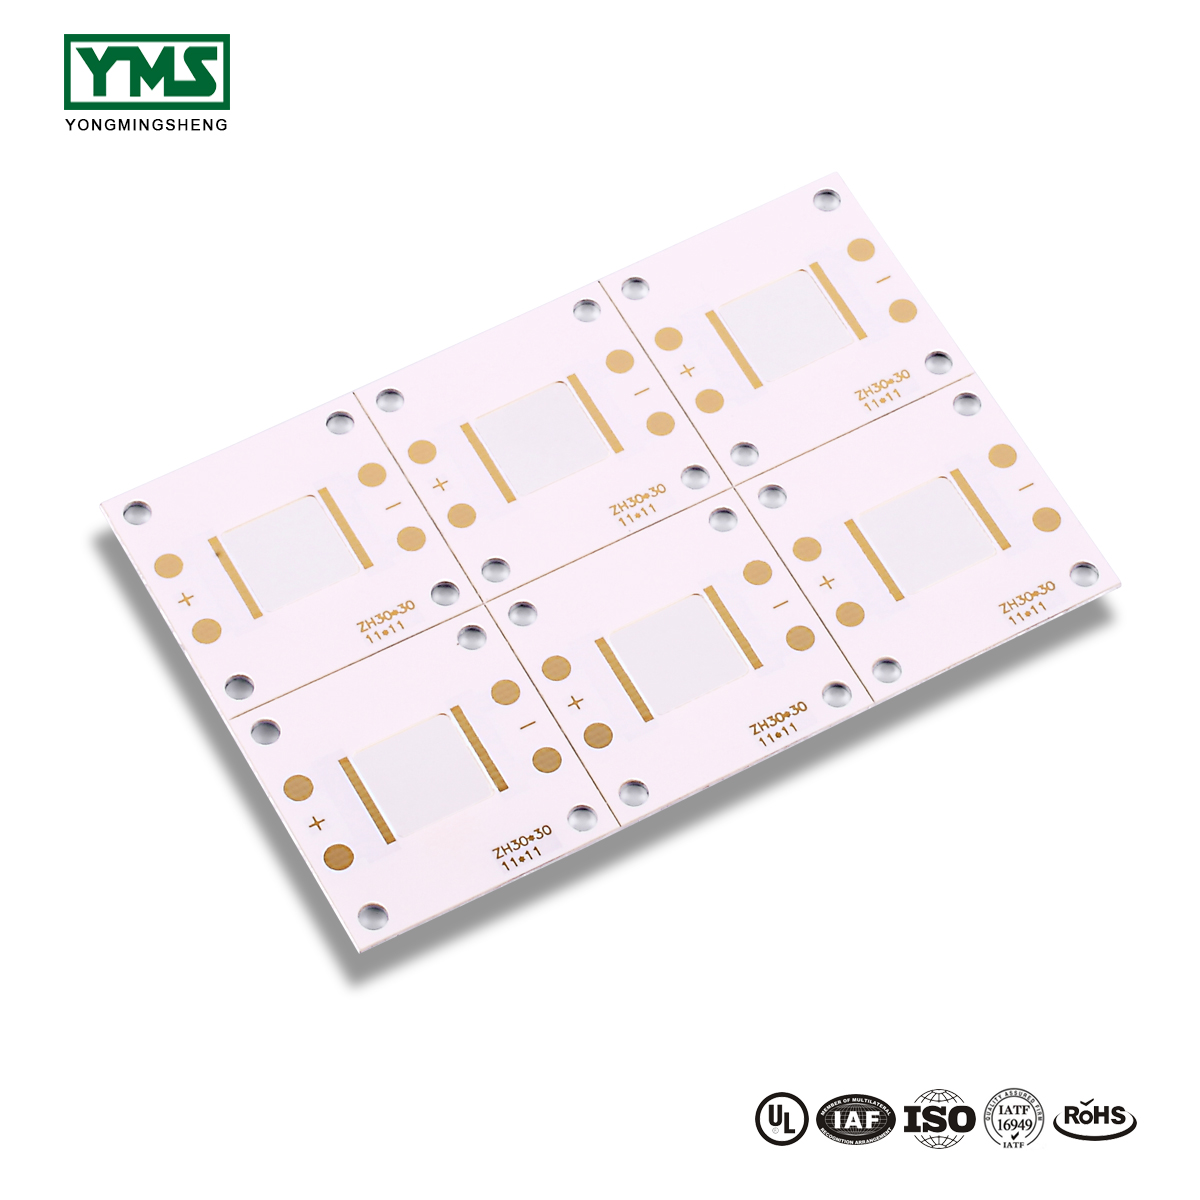 Low price for Ultra-Thin Pcb - 1Layer mirror Aluminum Base Board | YMSPCB – Yongmingsheng